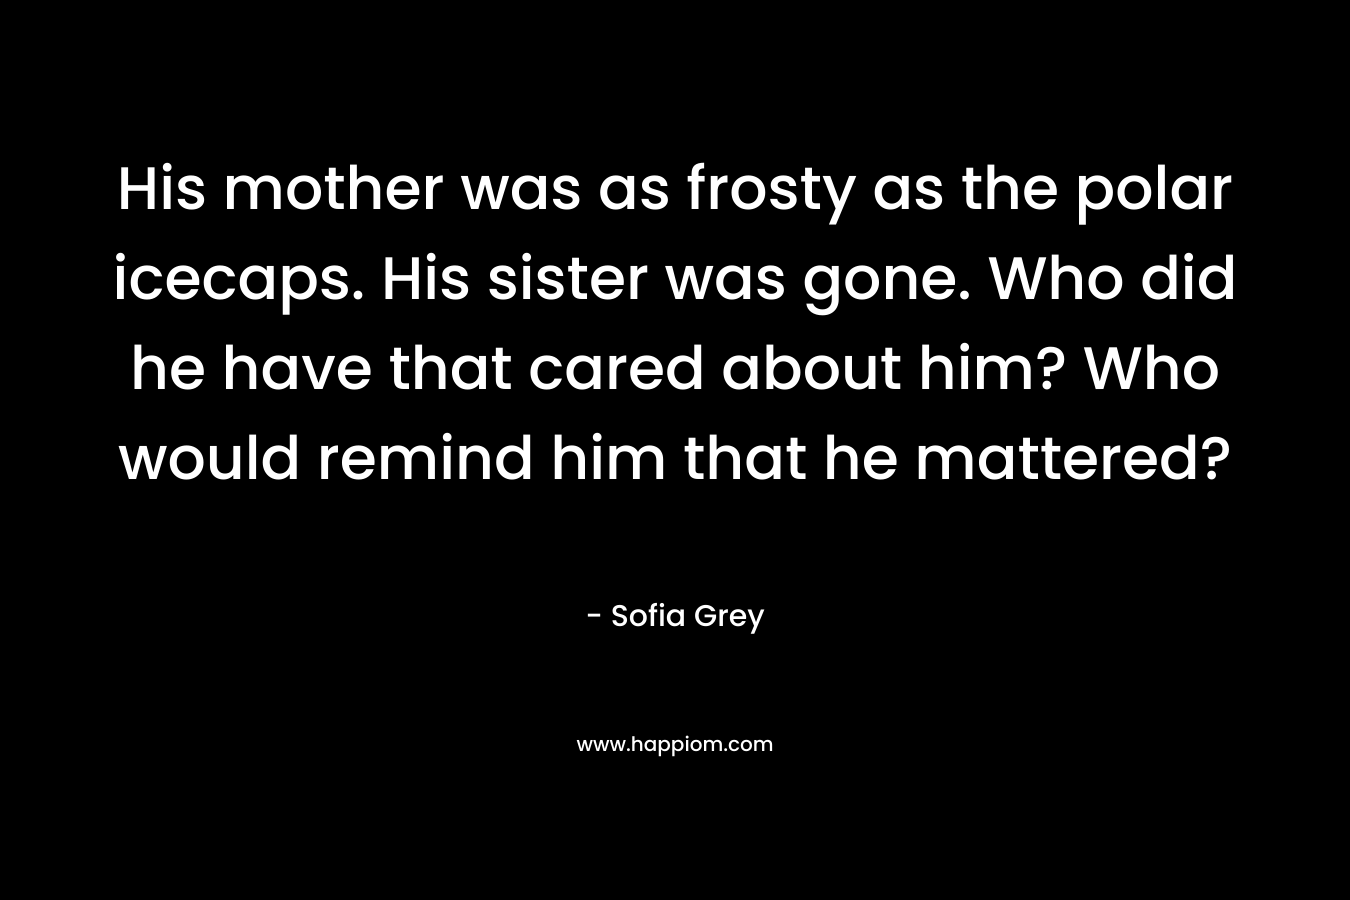 His mother was as frosty as the polar icecaps. His sister was gone. Who did he have that cared about him? Who would remind him that he mattered? – Sofia Grey